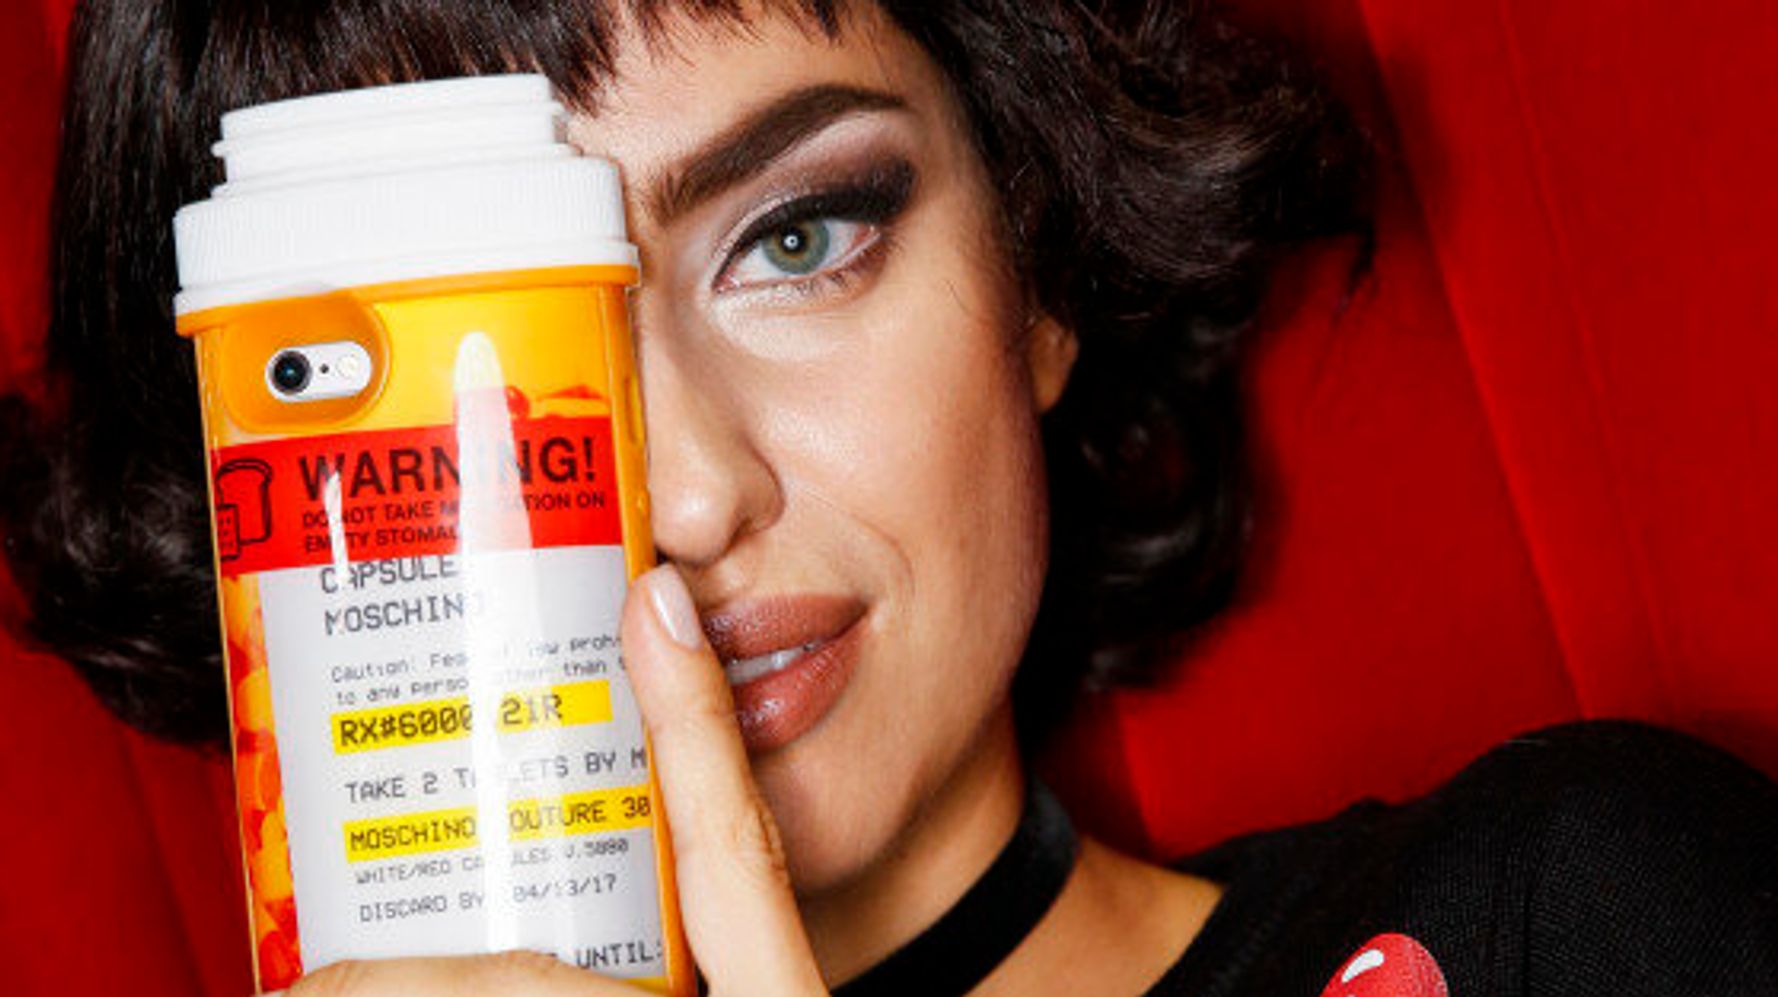 Nordstrom pulls Moschino's drug-themed fashion line from its stores